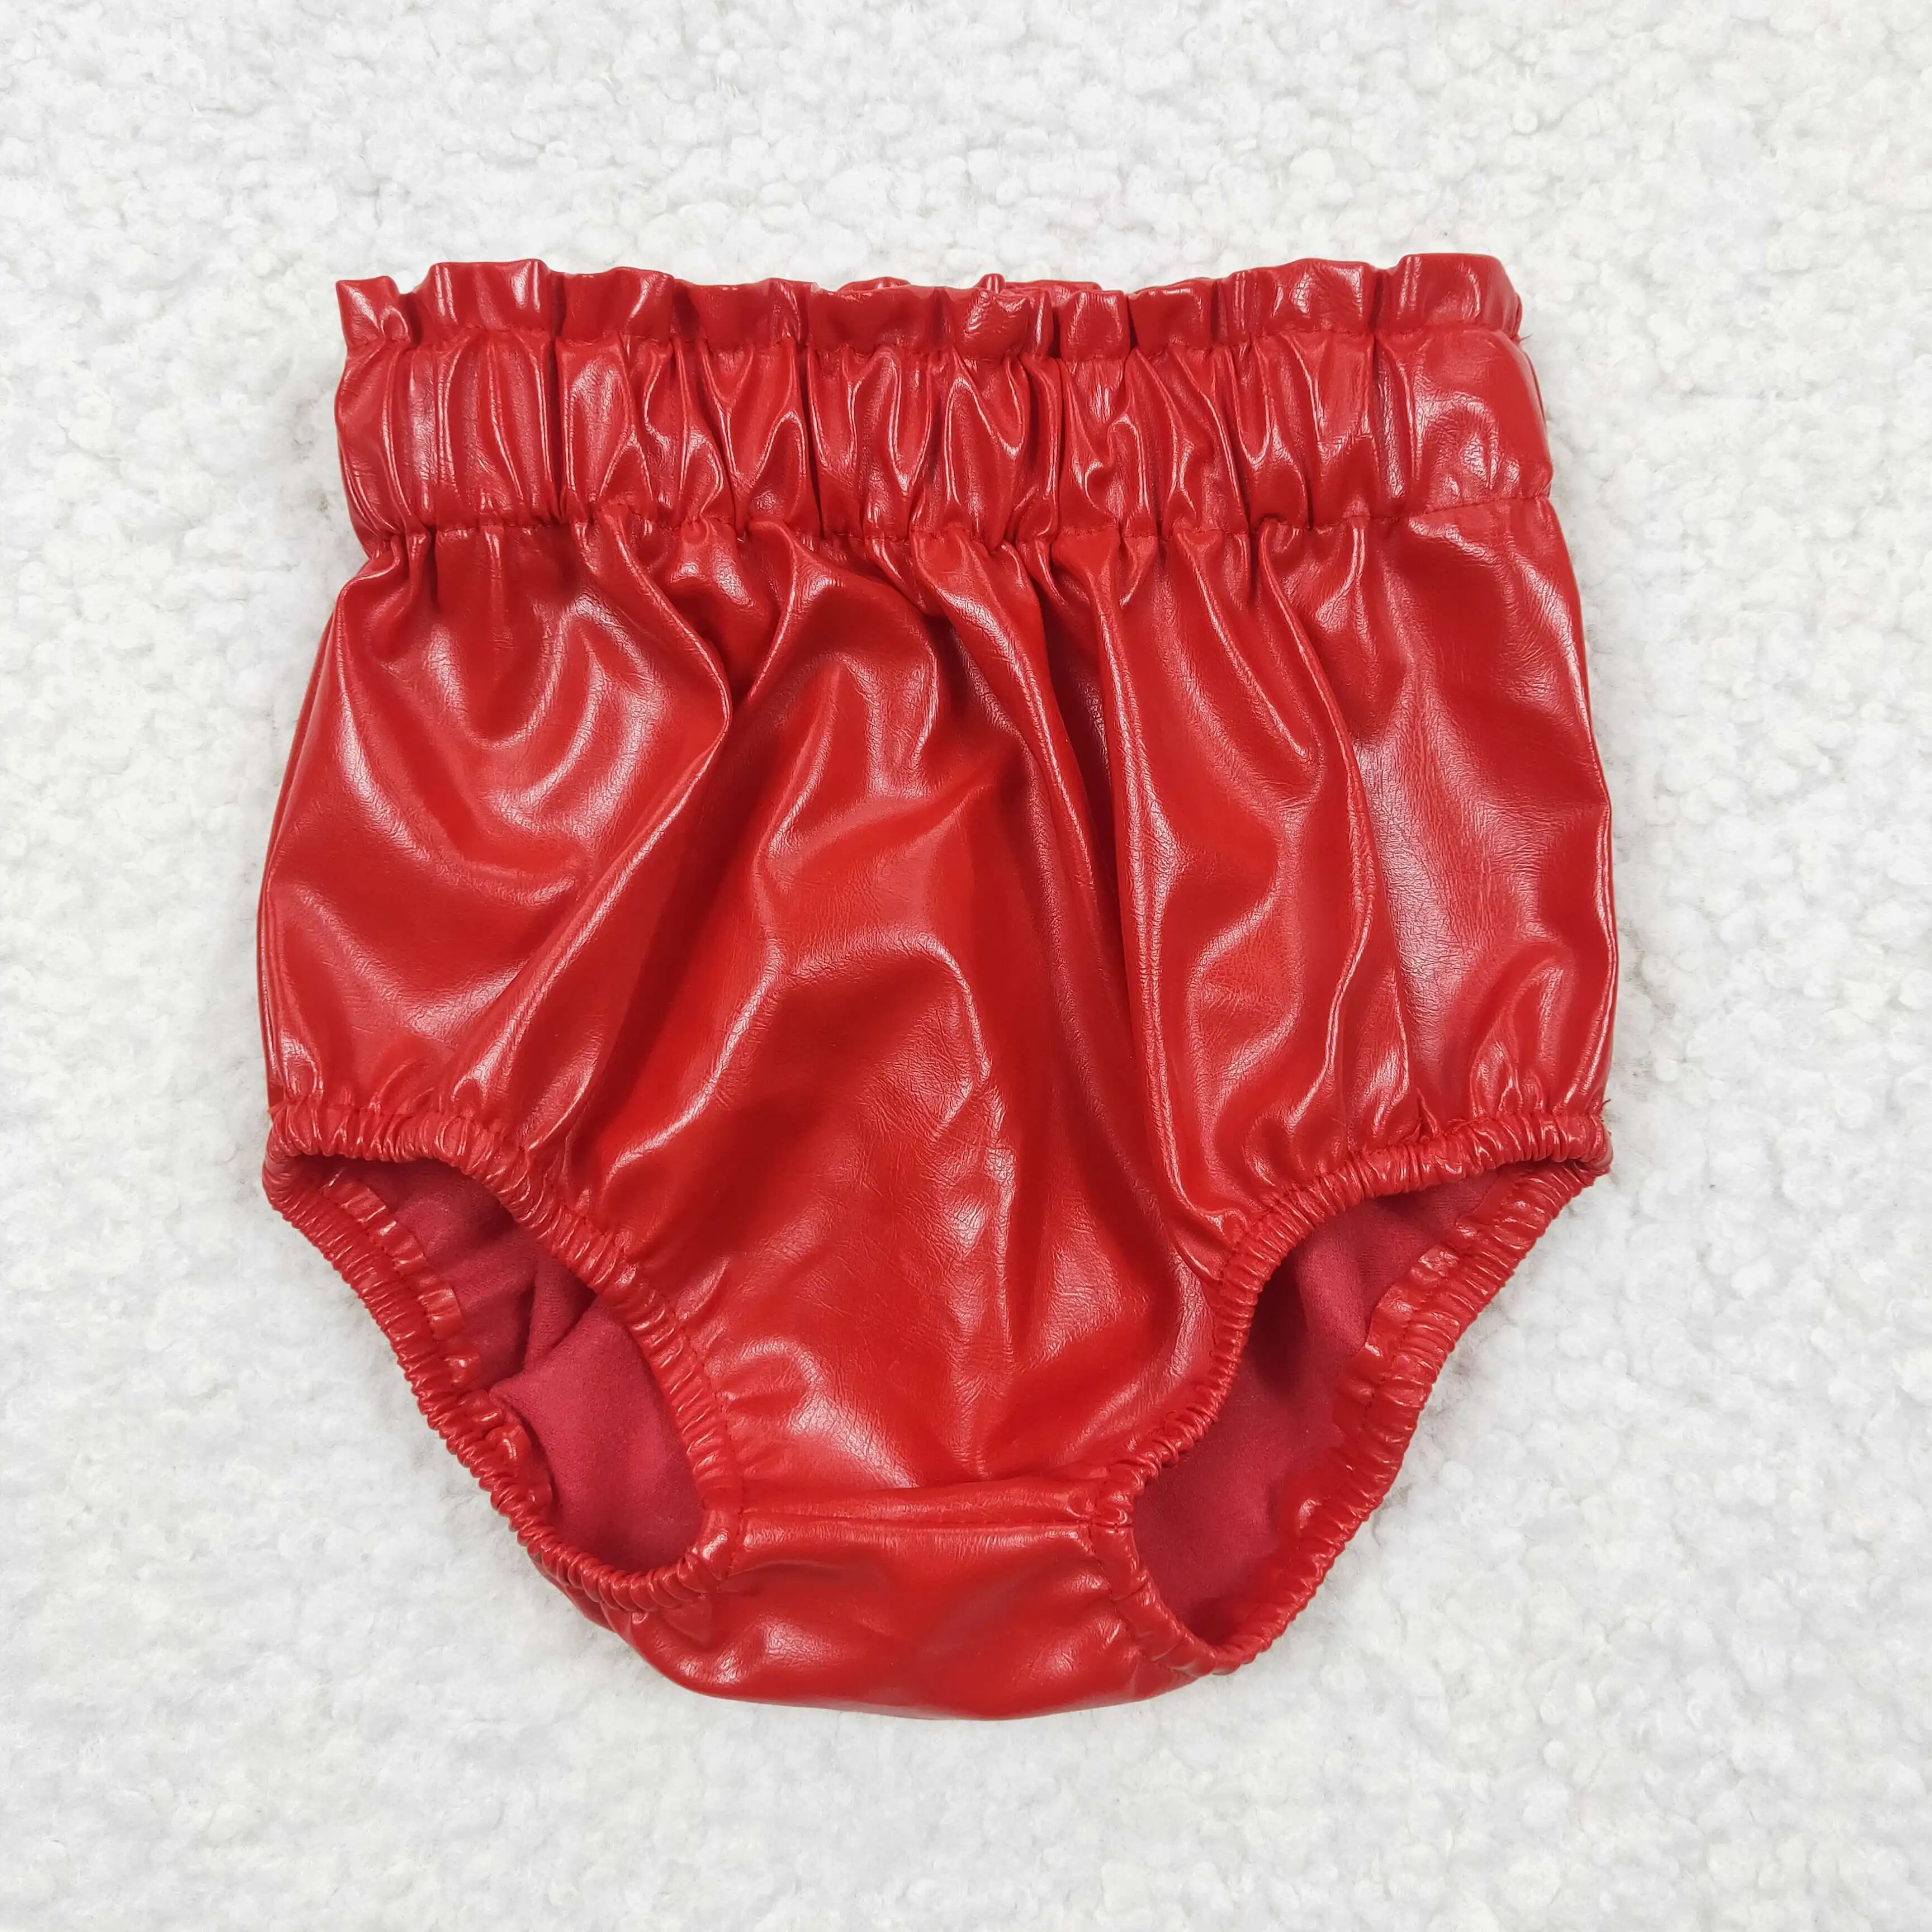 New Products RTS Soft Material Kids Elastic Waist Shorts Newborn Red Clothing Baby Leather Bummies